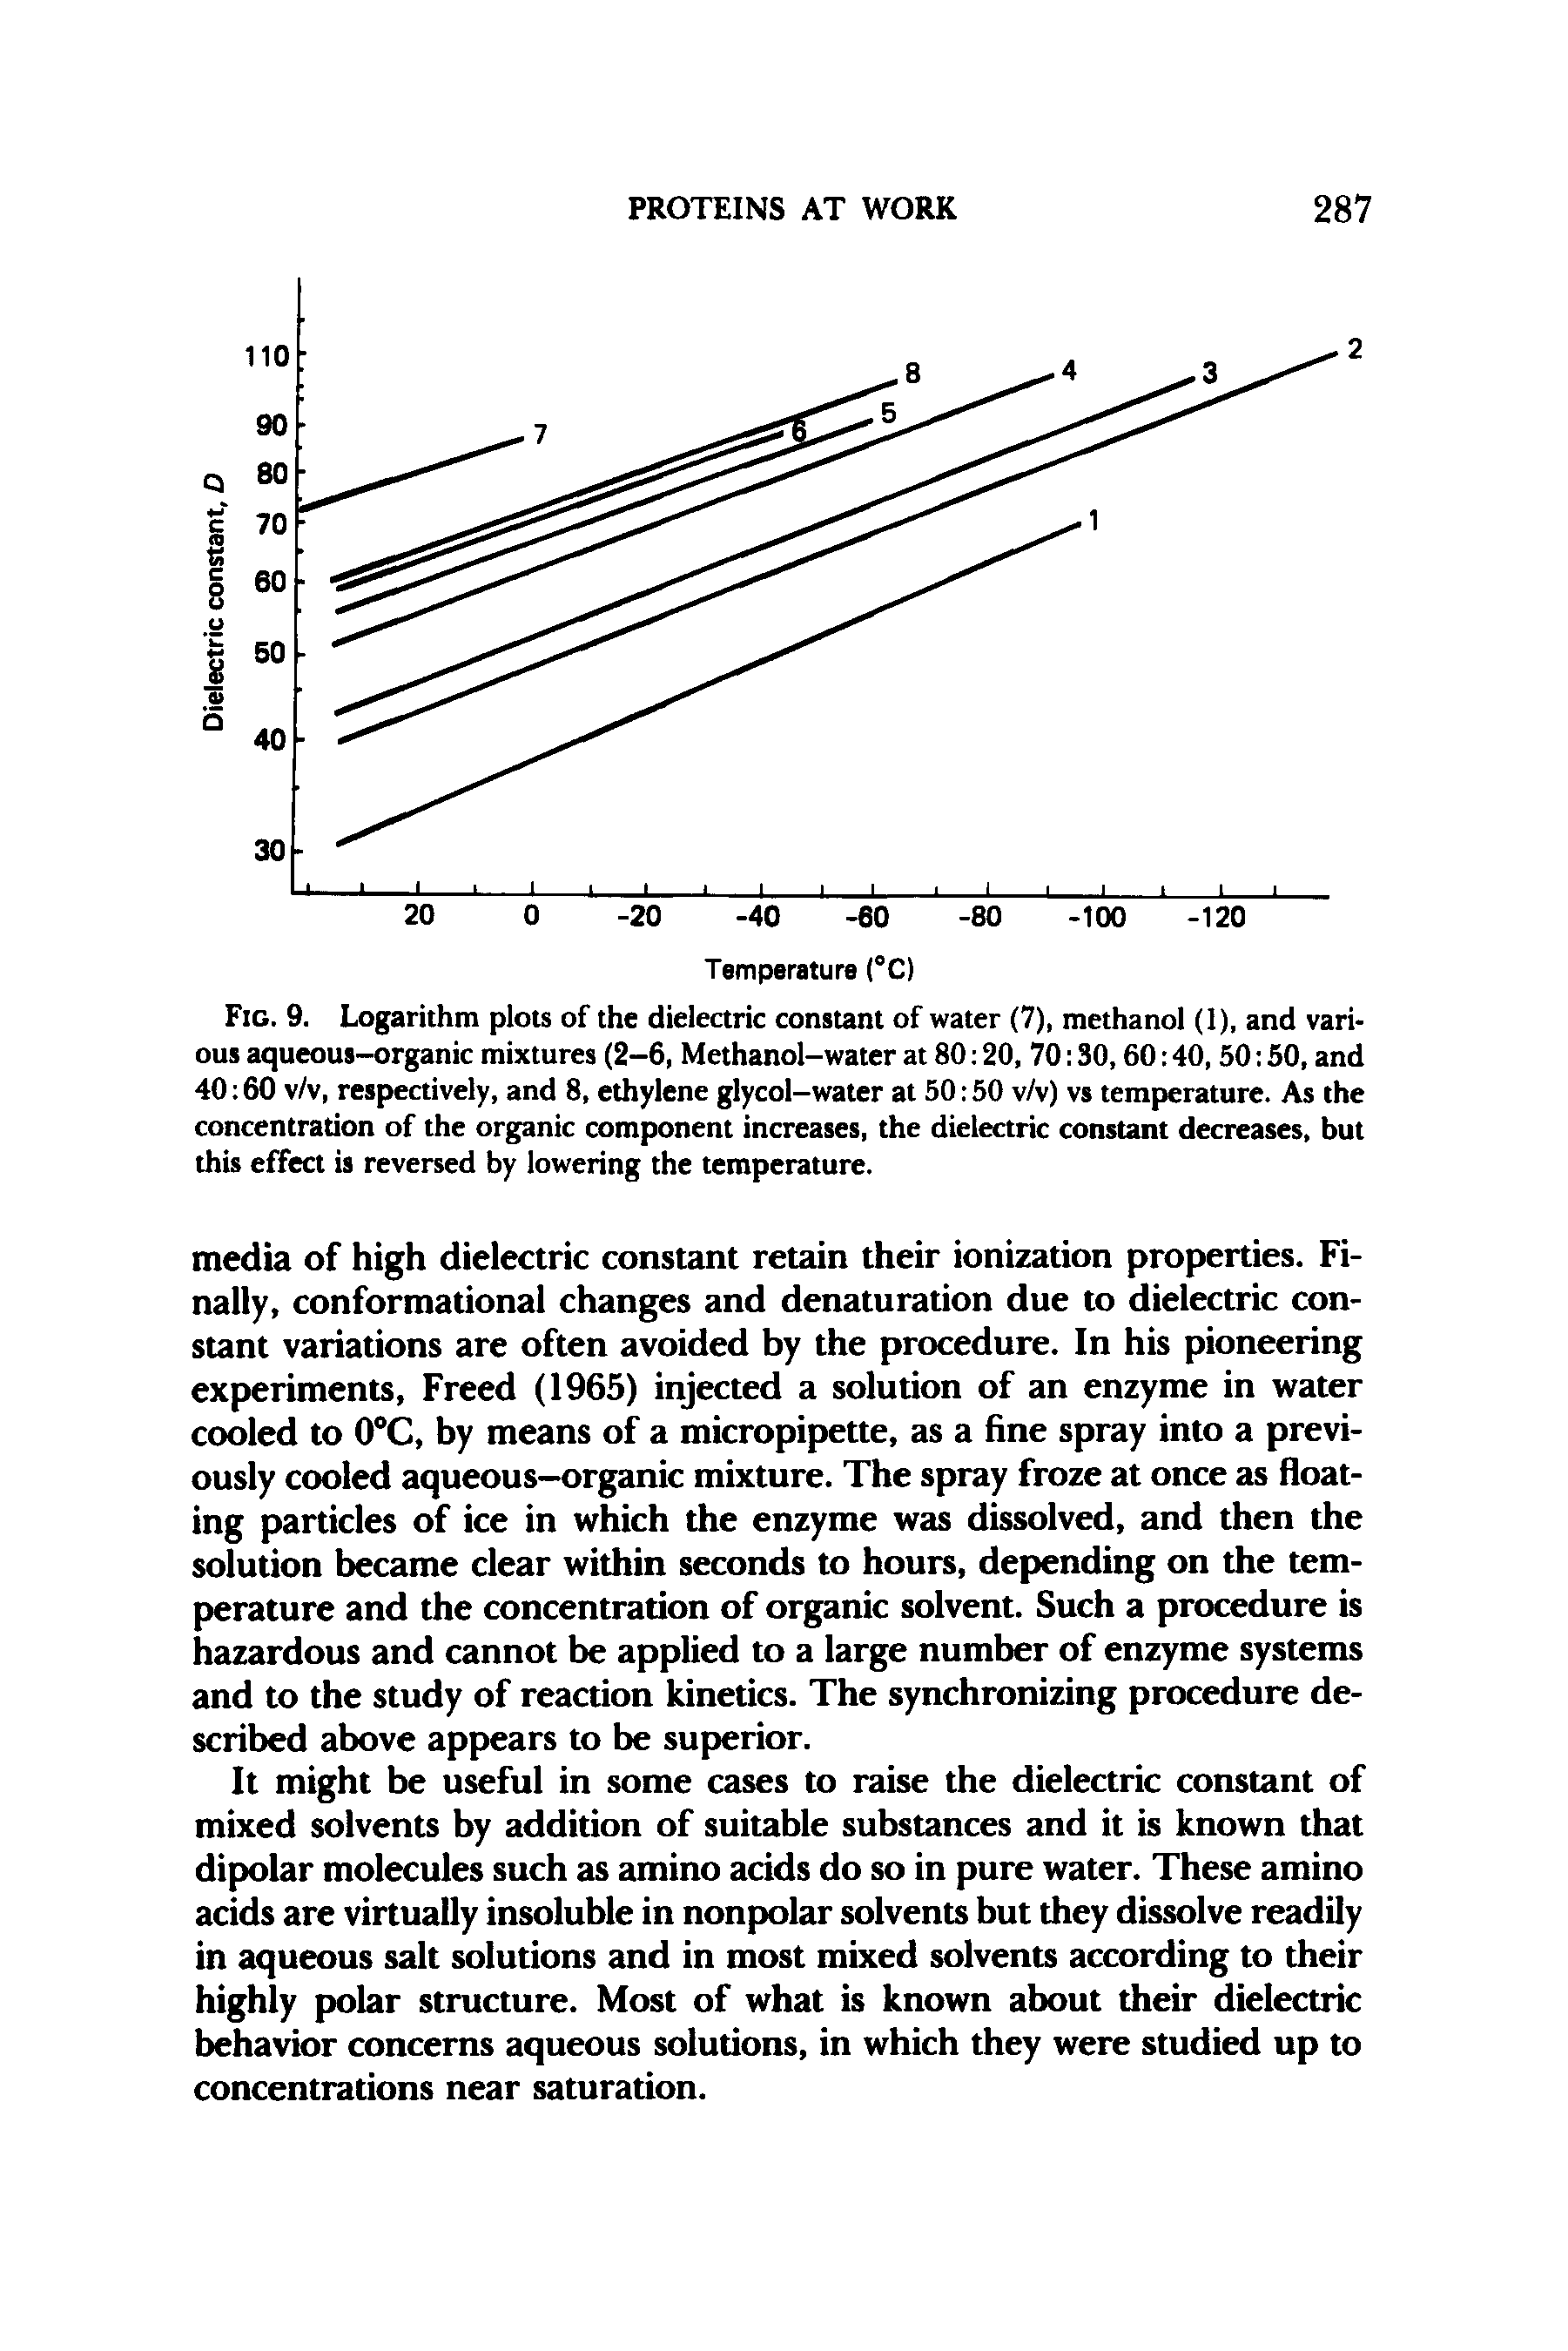 Fig. 9. Logarithm plots of the dielectric constant of water (7), methanol (1), and various aqueous-organic mixtures (2-6, Methanol-water at 80 20, 70 30,60 40, 50 50, and 40 60 v/v, respectively, and 8, ethylene glycol-water at 50 50 v/v) vs temperature. As the concentradon of the organic component increases, the dielectric constant decreases, but this effect is reversed by lowering the temperature.